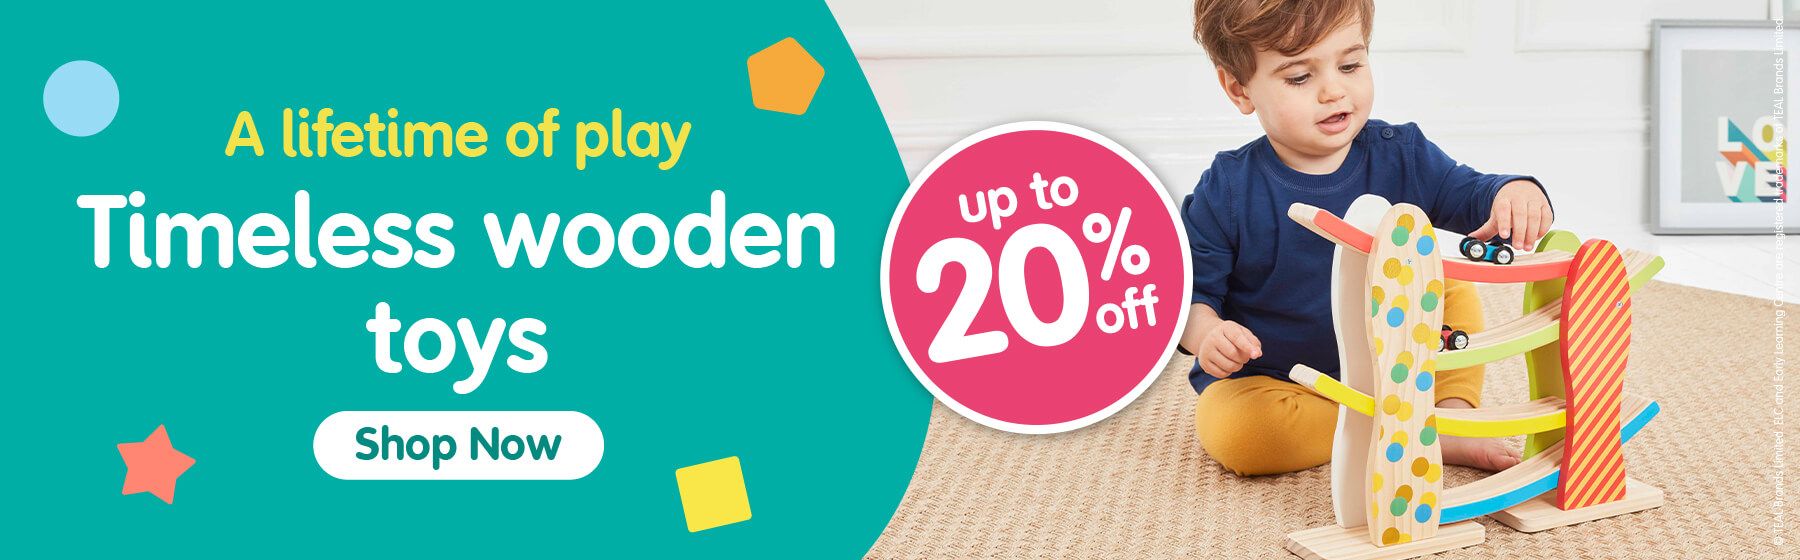 20% off wooden toys